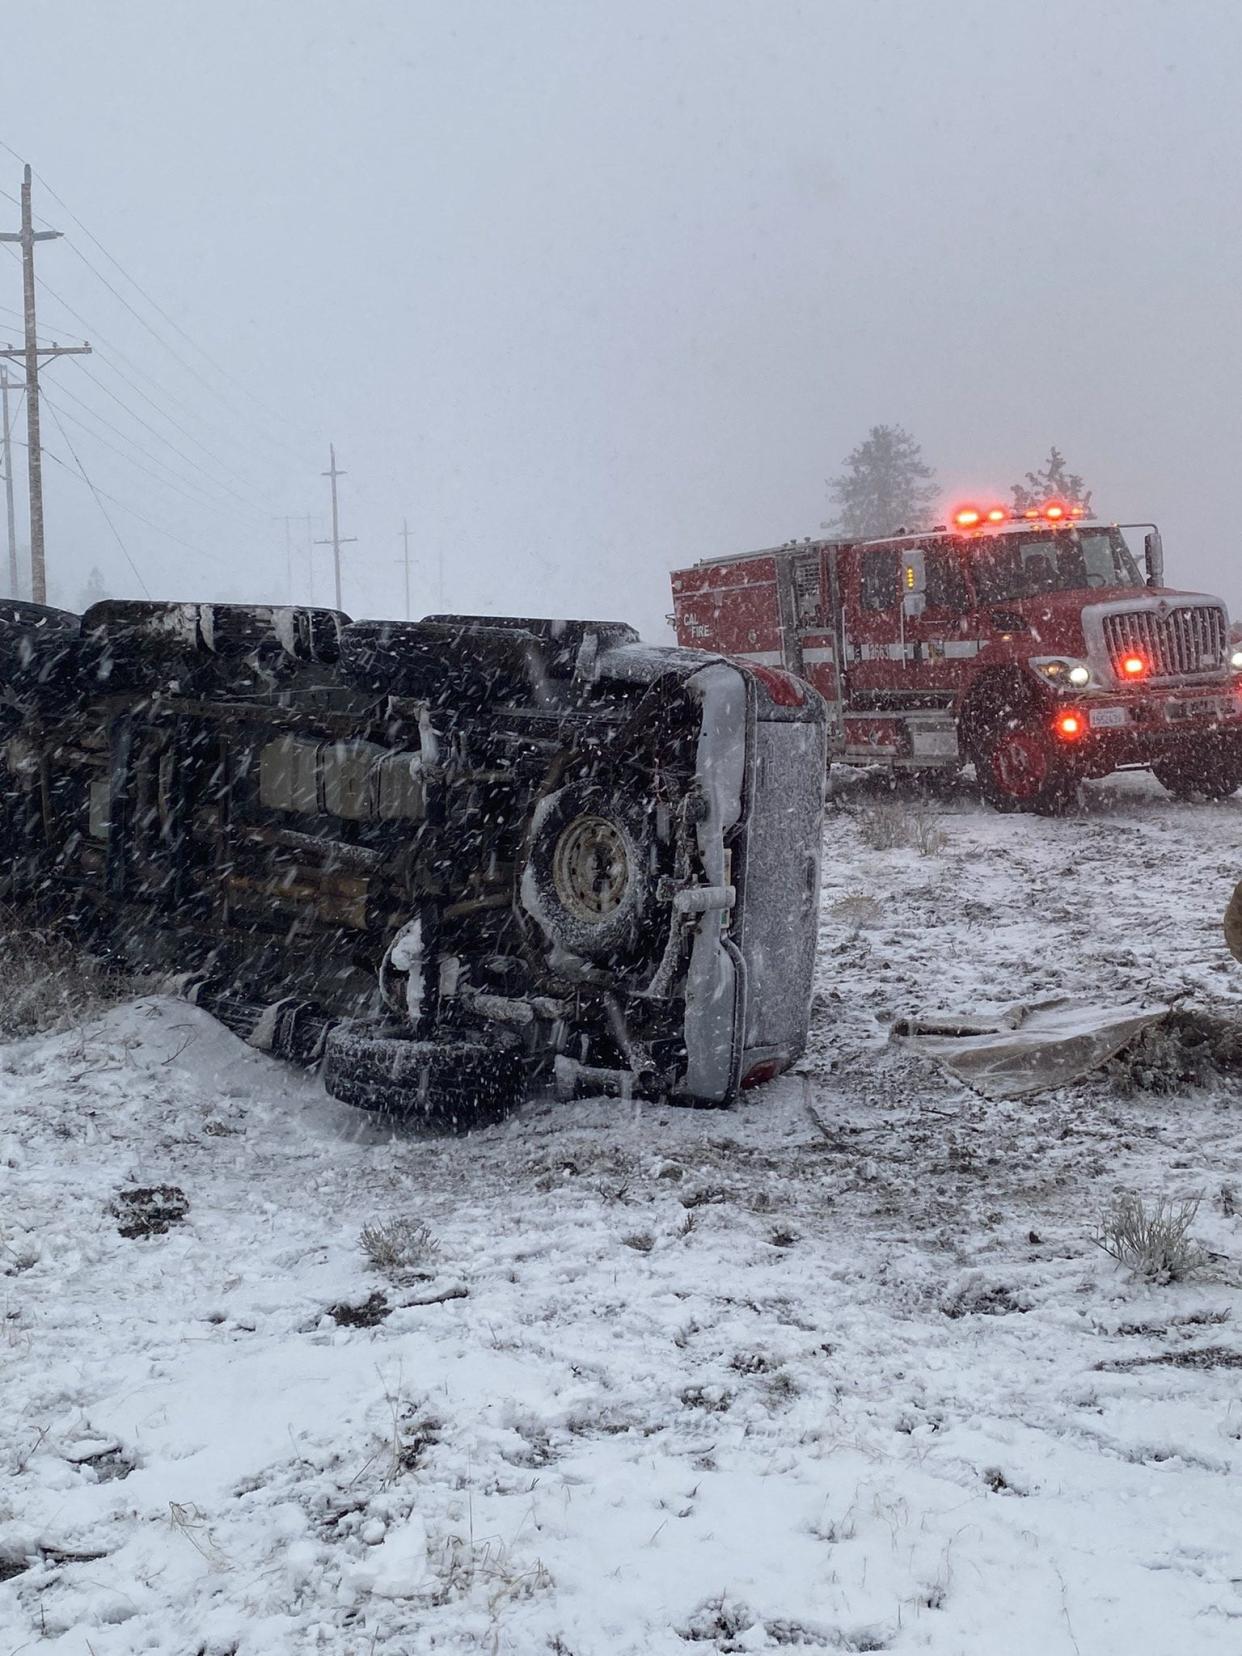 The California Department of Transportation closed parts of Interstate 5 and other North State highways on Tuesday, March 28, 2023. The agency reported multiple accidents including big rig spinouts on some North State roads.